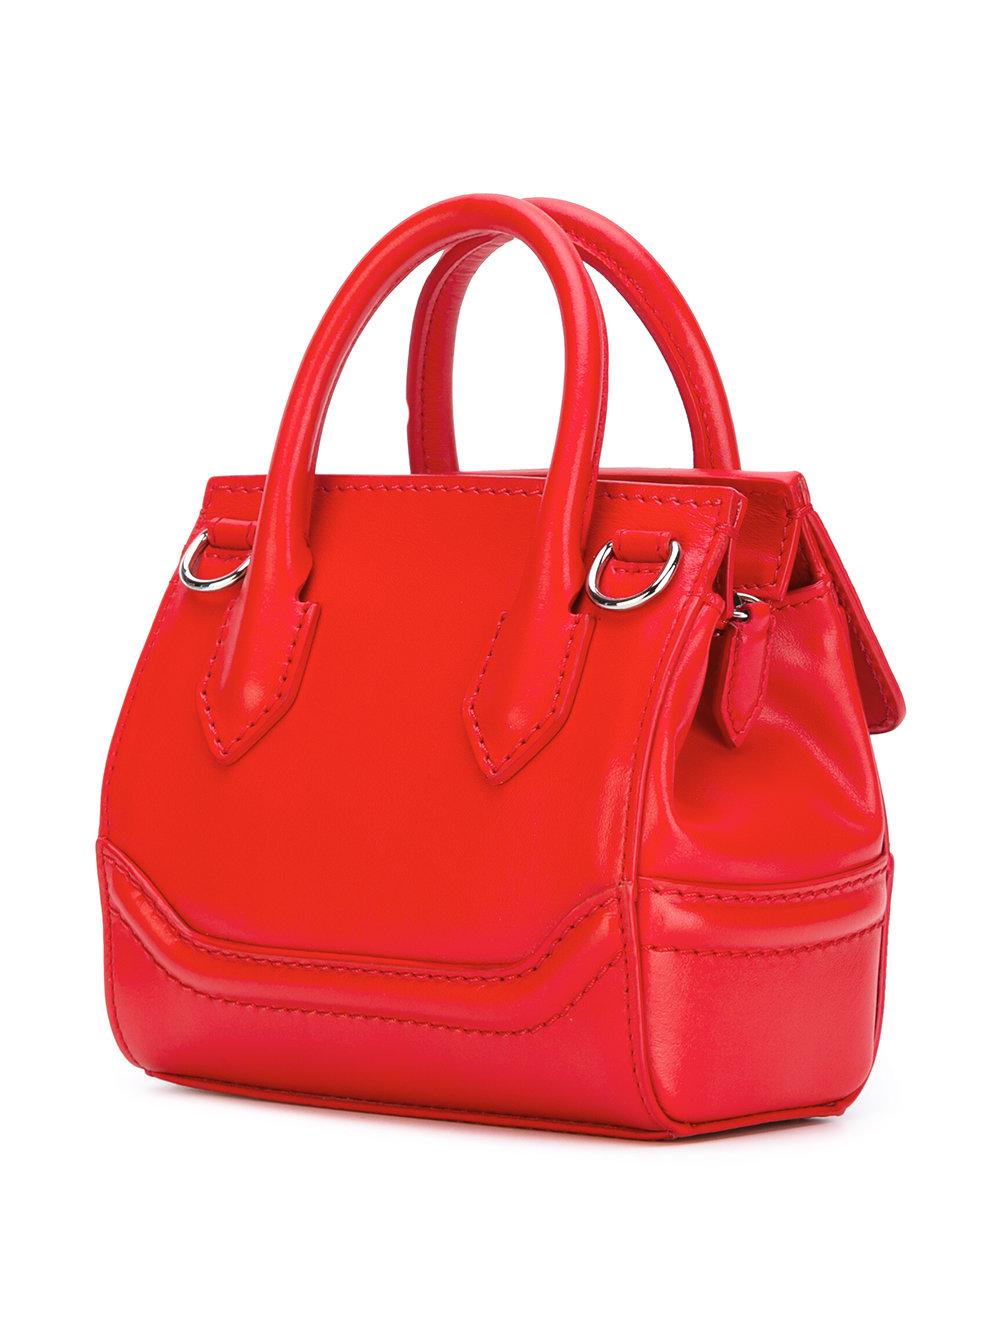 Versace Mini Palazzo Empire Shoulder Bag in Red | Lyst